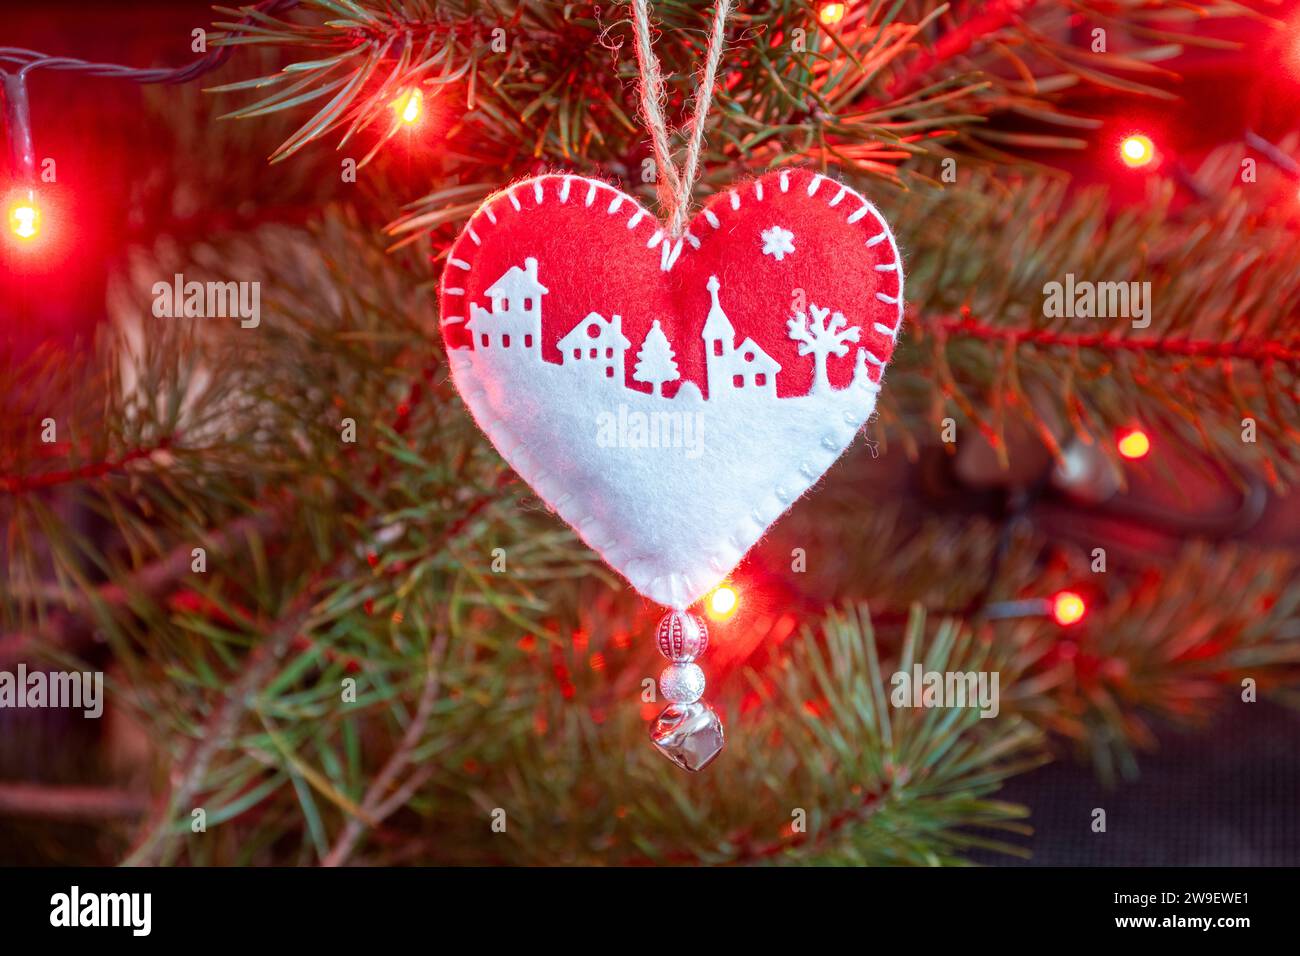 Homemade handicraft felt Christmas tree decorations on a tree with lights, a heart shaped red and white snow scene Stock Photo